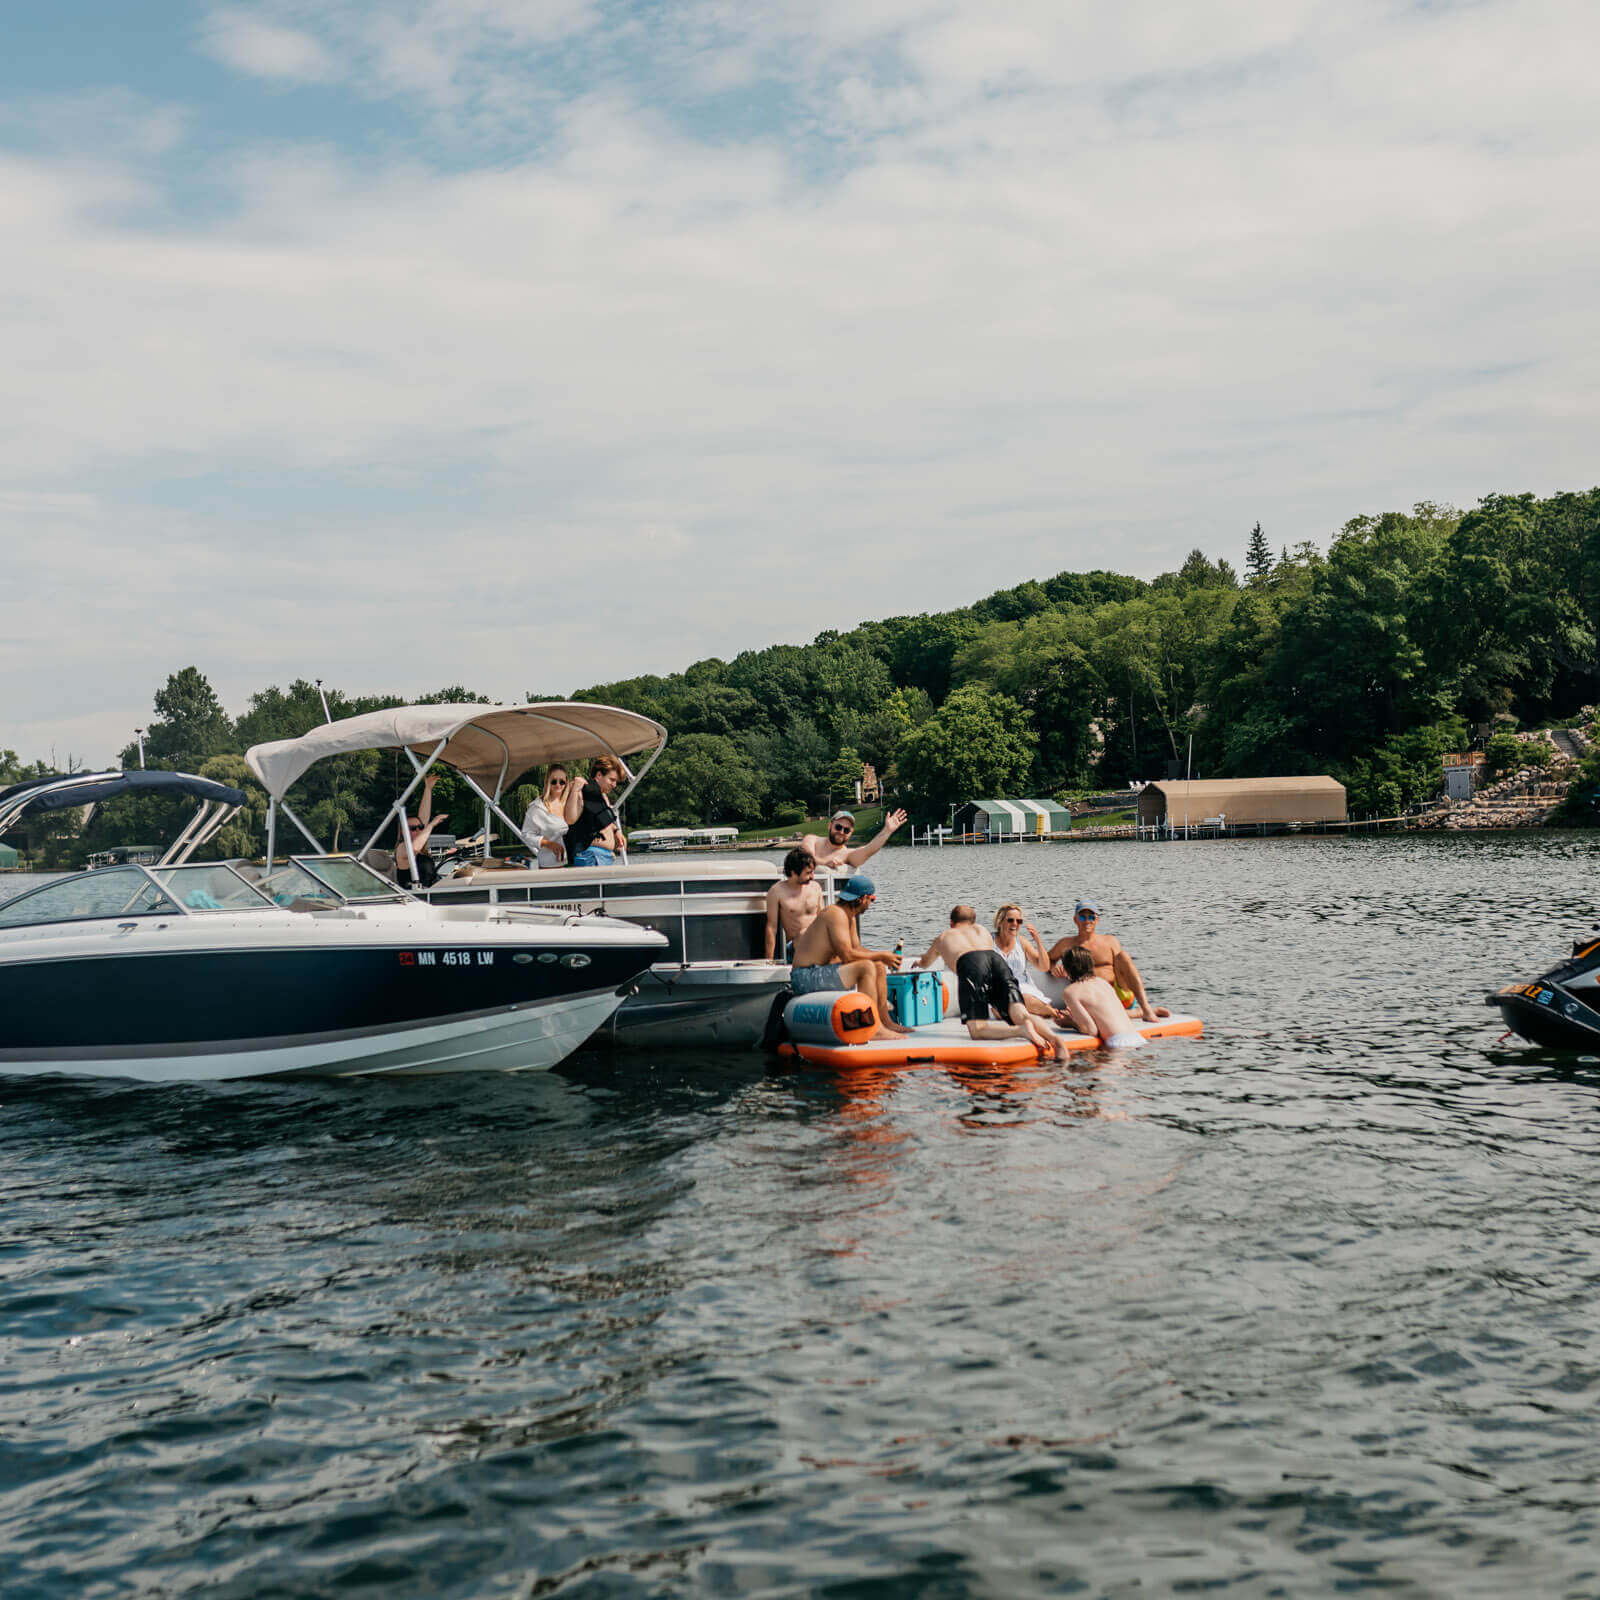 A group of people enjoying their time on a pontoon boat on a lake, equipped with a MISSION Reef Deck | Inflatable Swim Platform + Lounger for added fun and safety. They have also brought along various boat accessories including a MISSION.